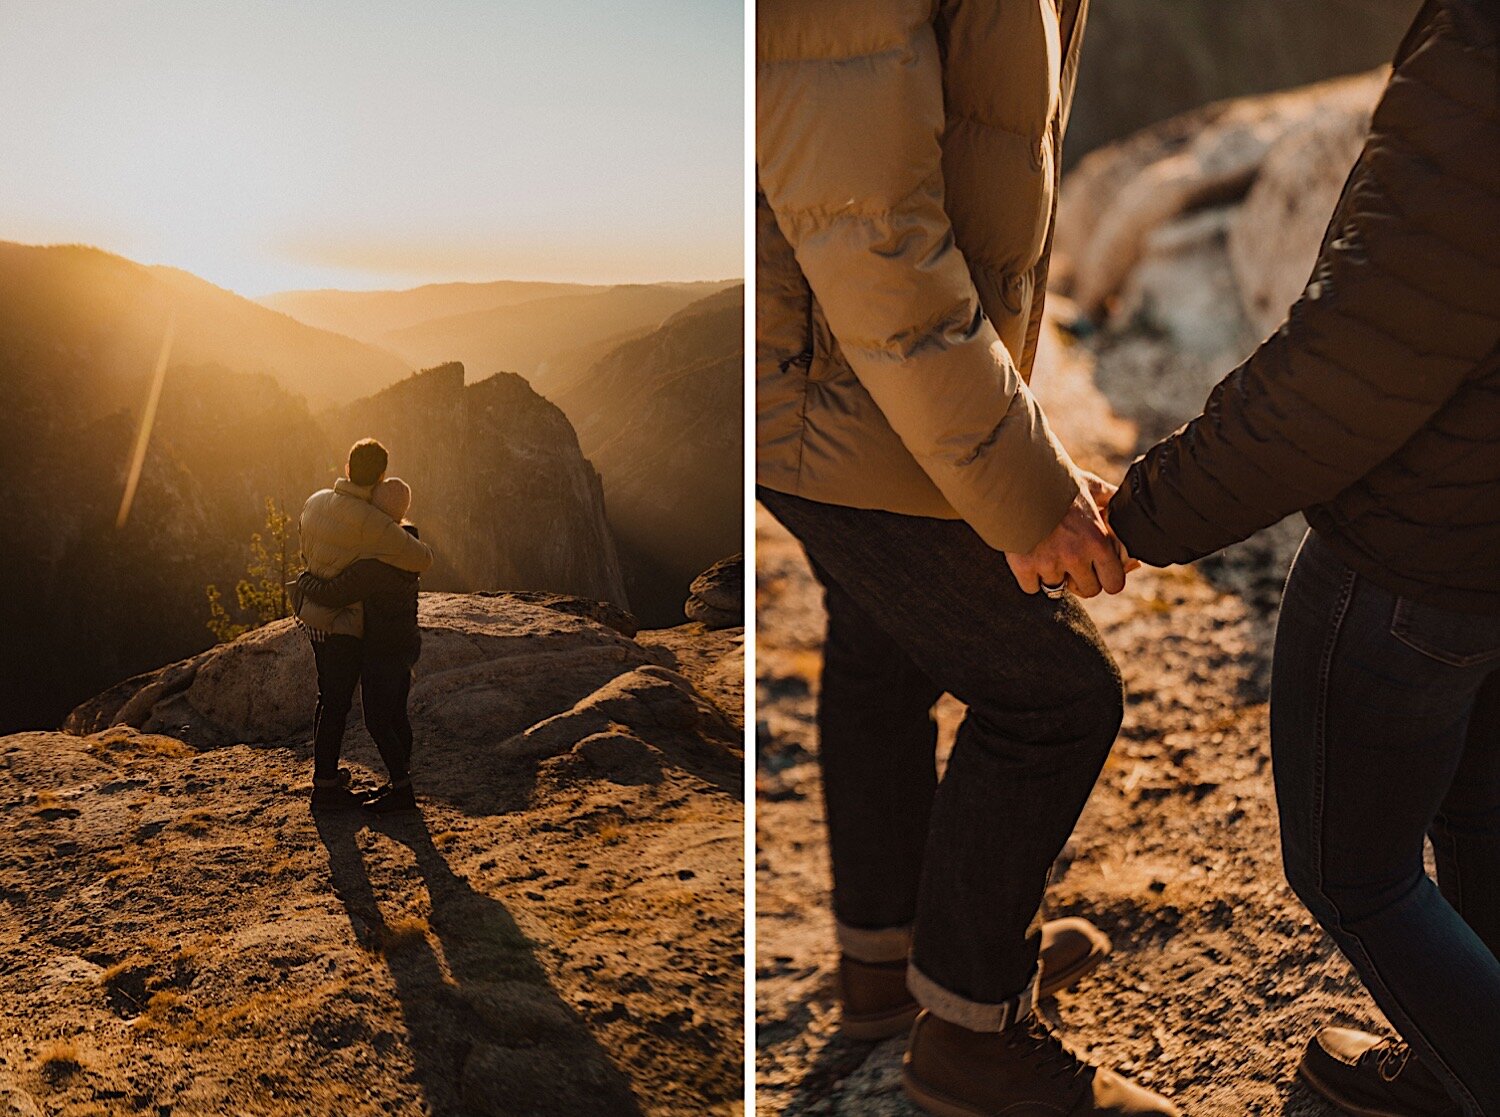 Dupree (83 of 263)_Dupree (85 of 263)_Engagement_Photographer_Parks_California_National_proposal.jpg